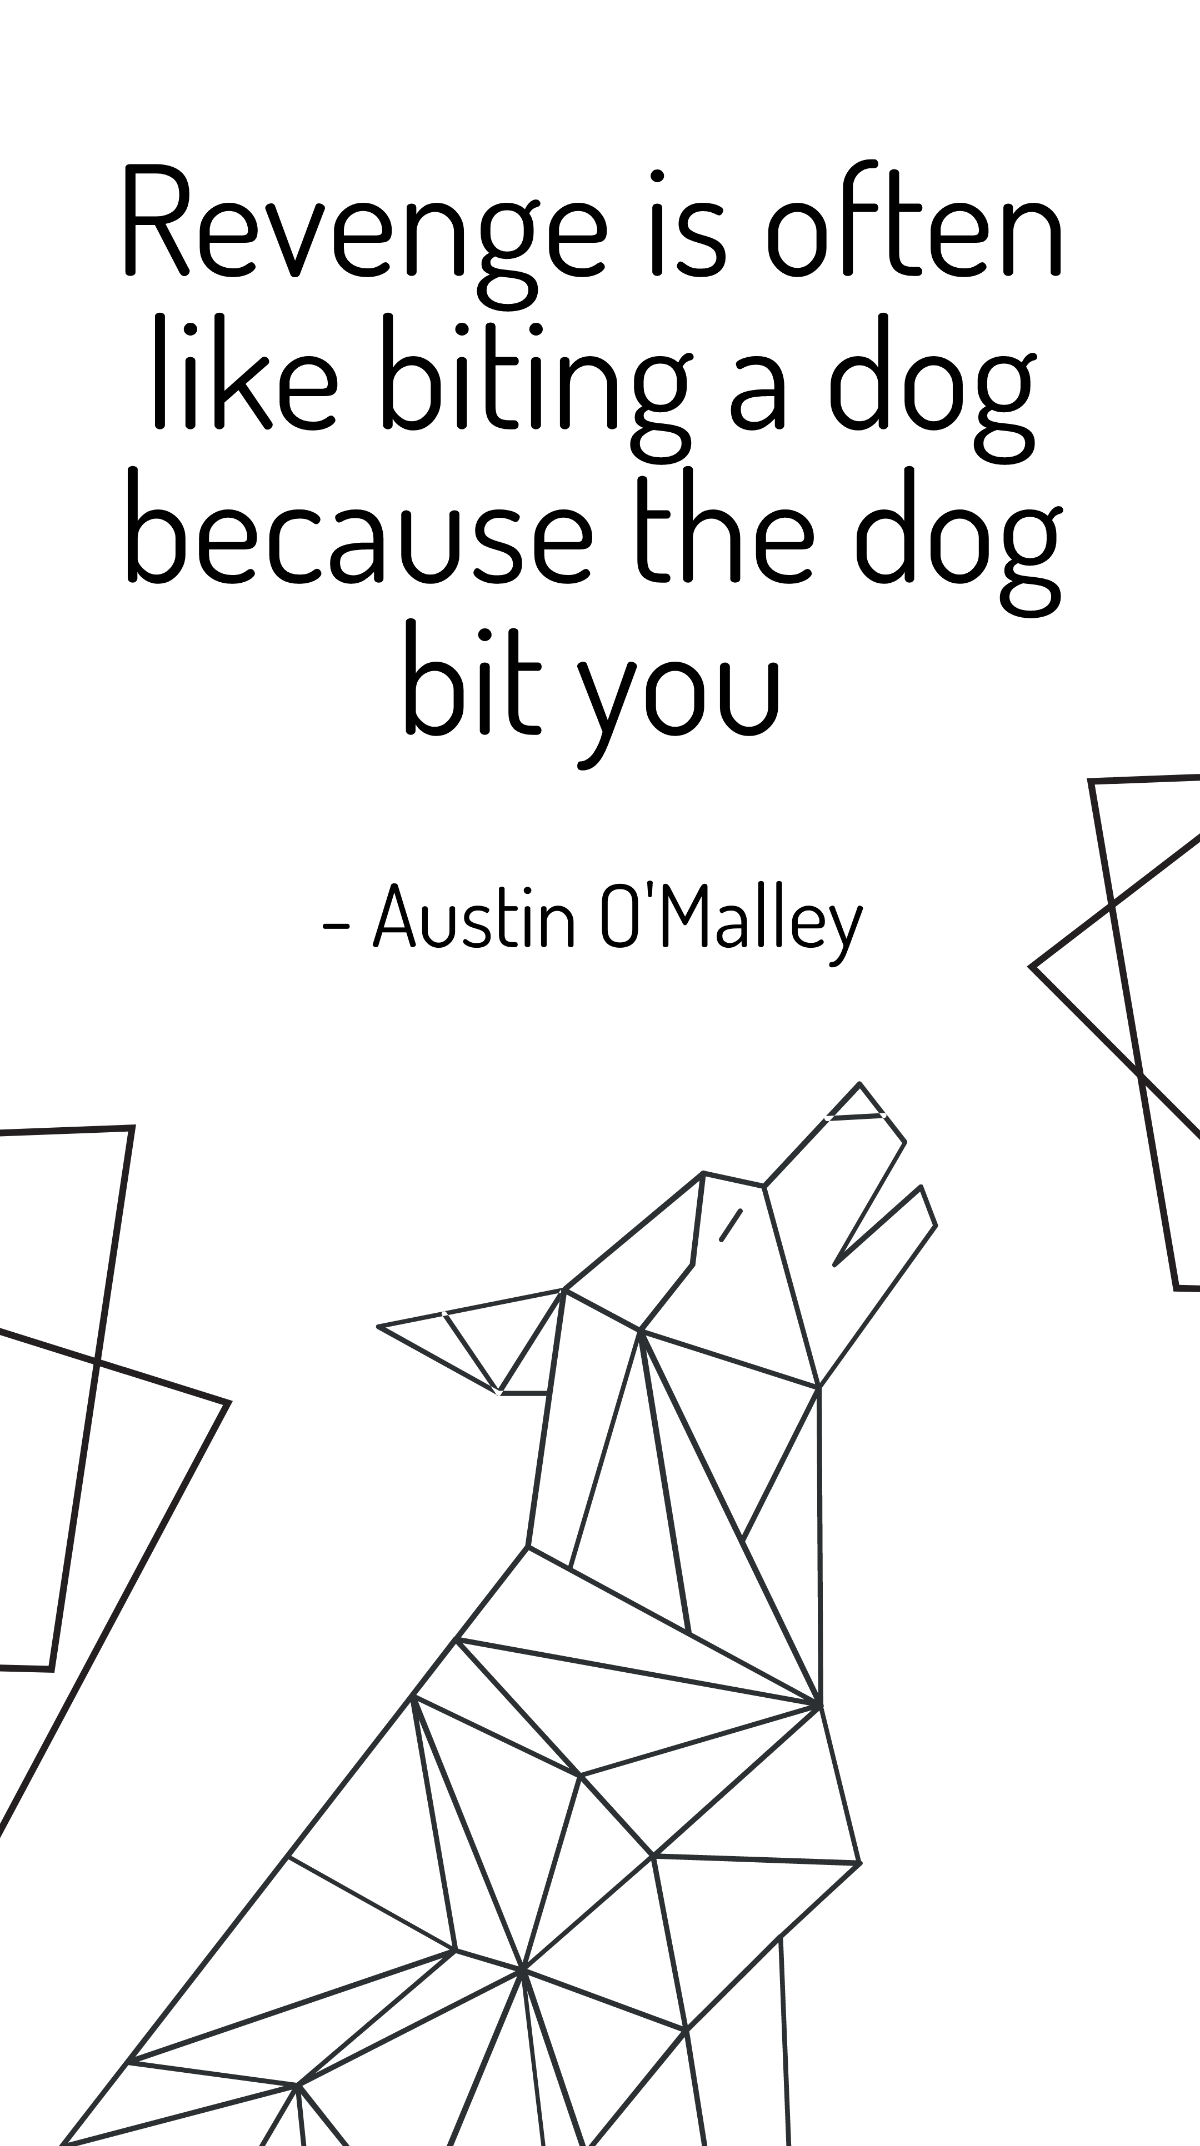 Free Austin O'Malley - Revenge is often like biting a dog because the dog bit you Template